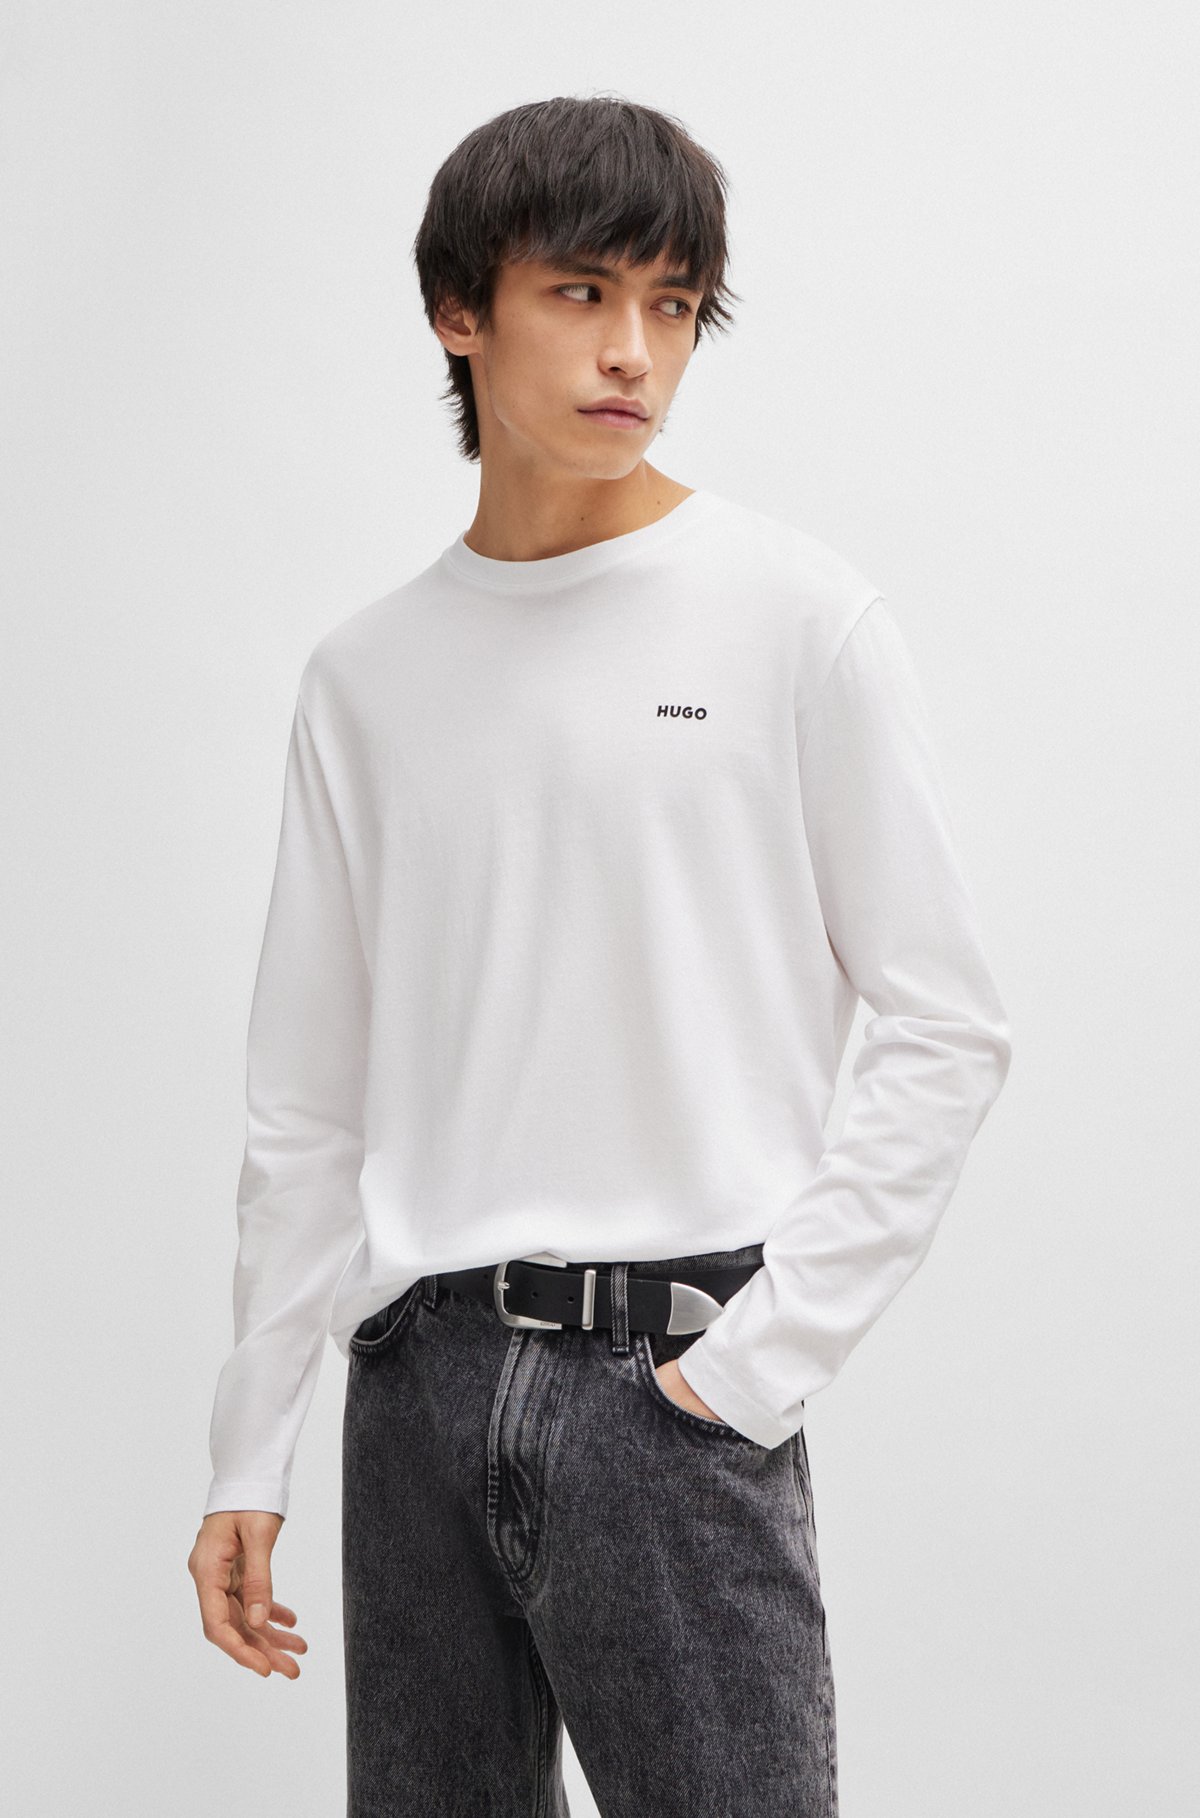 HUGO - Long-sleeved T-shirt in cotton jersey with logo print